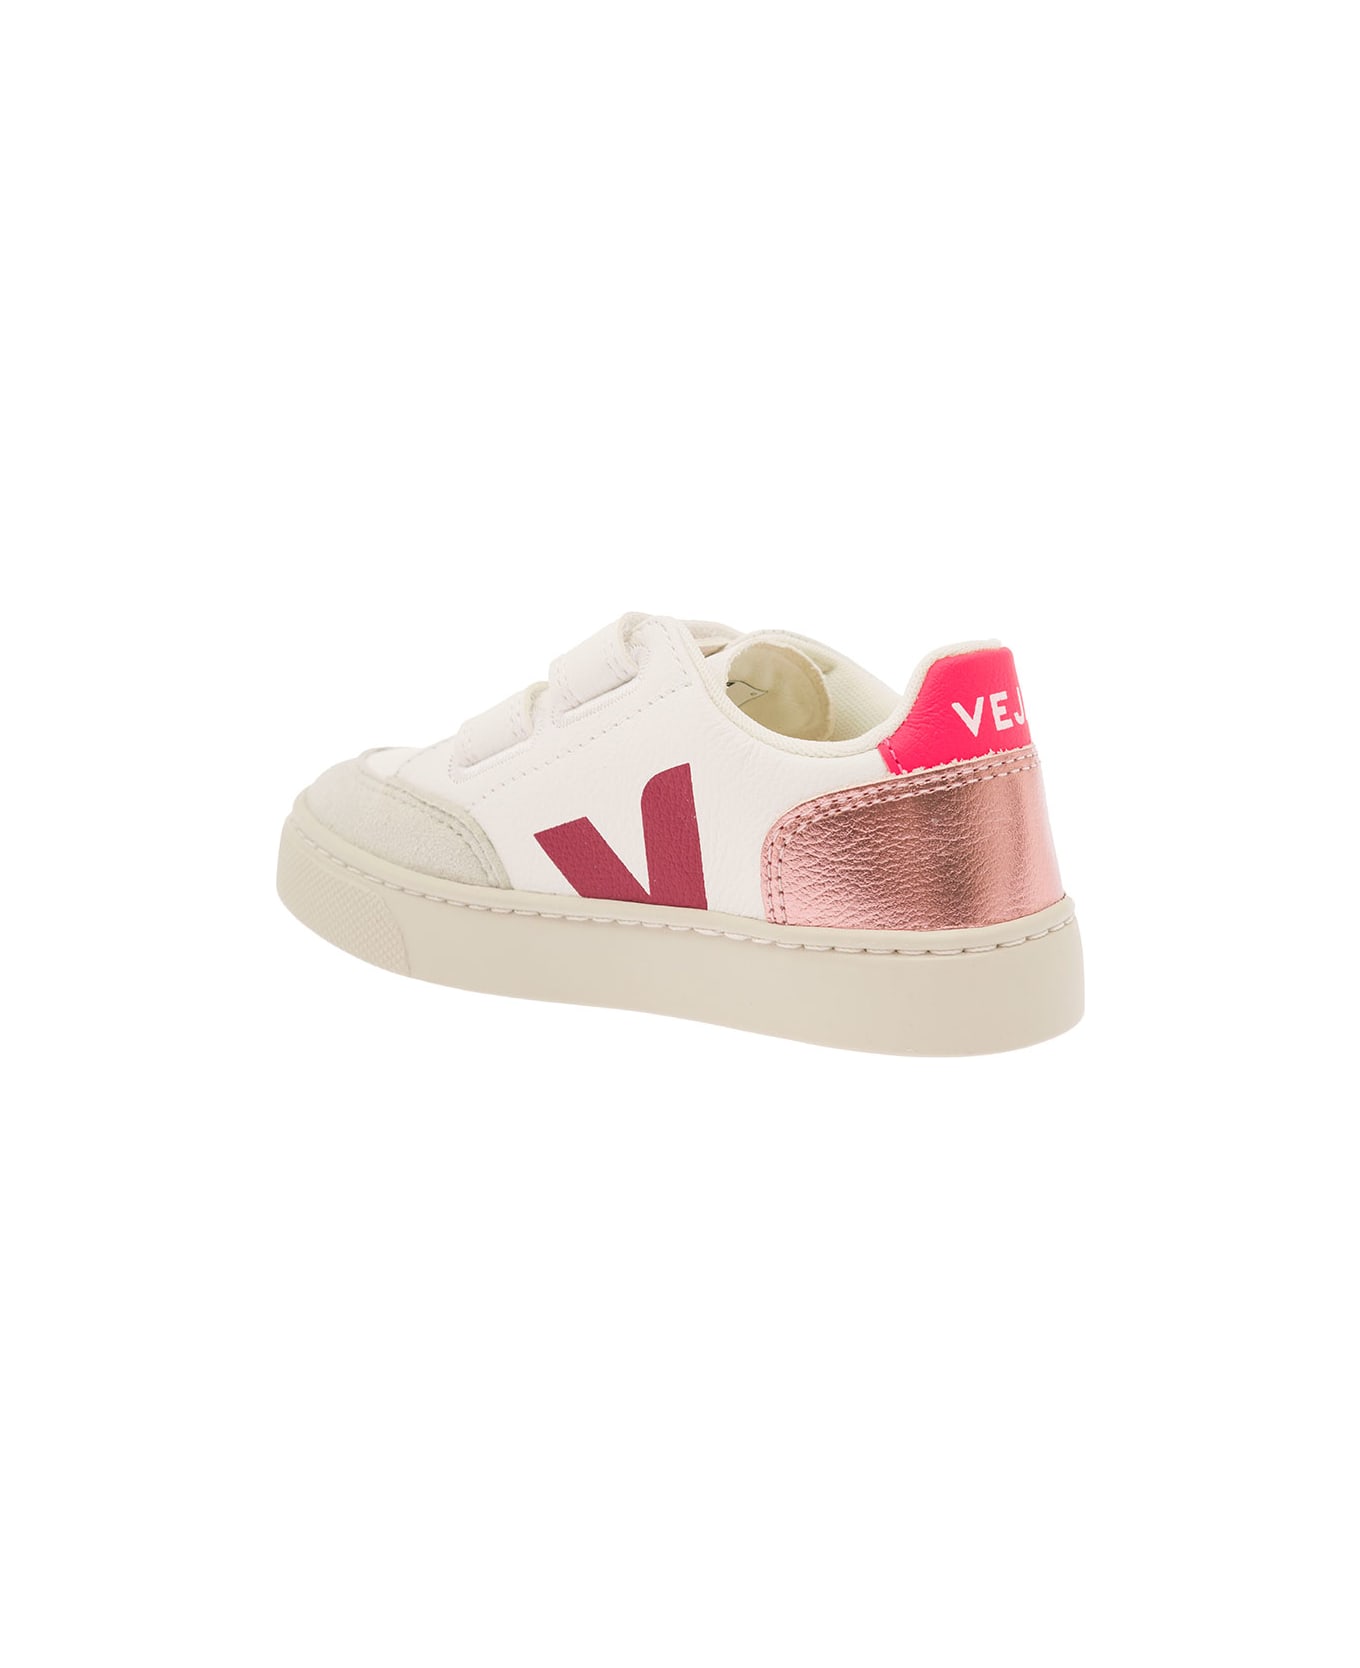 Veja White Sneaker With Fuchsia Logo And Heel Tab In Leather Girl - Multicolor